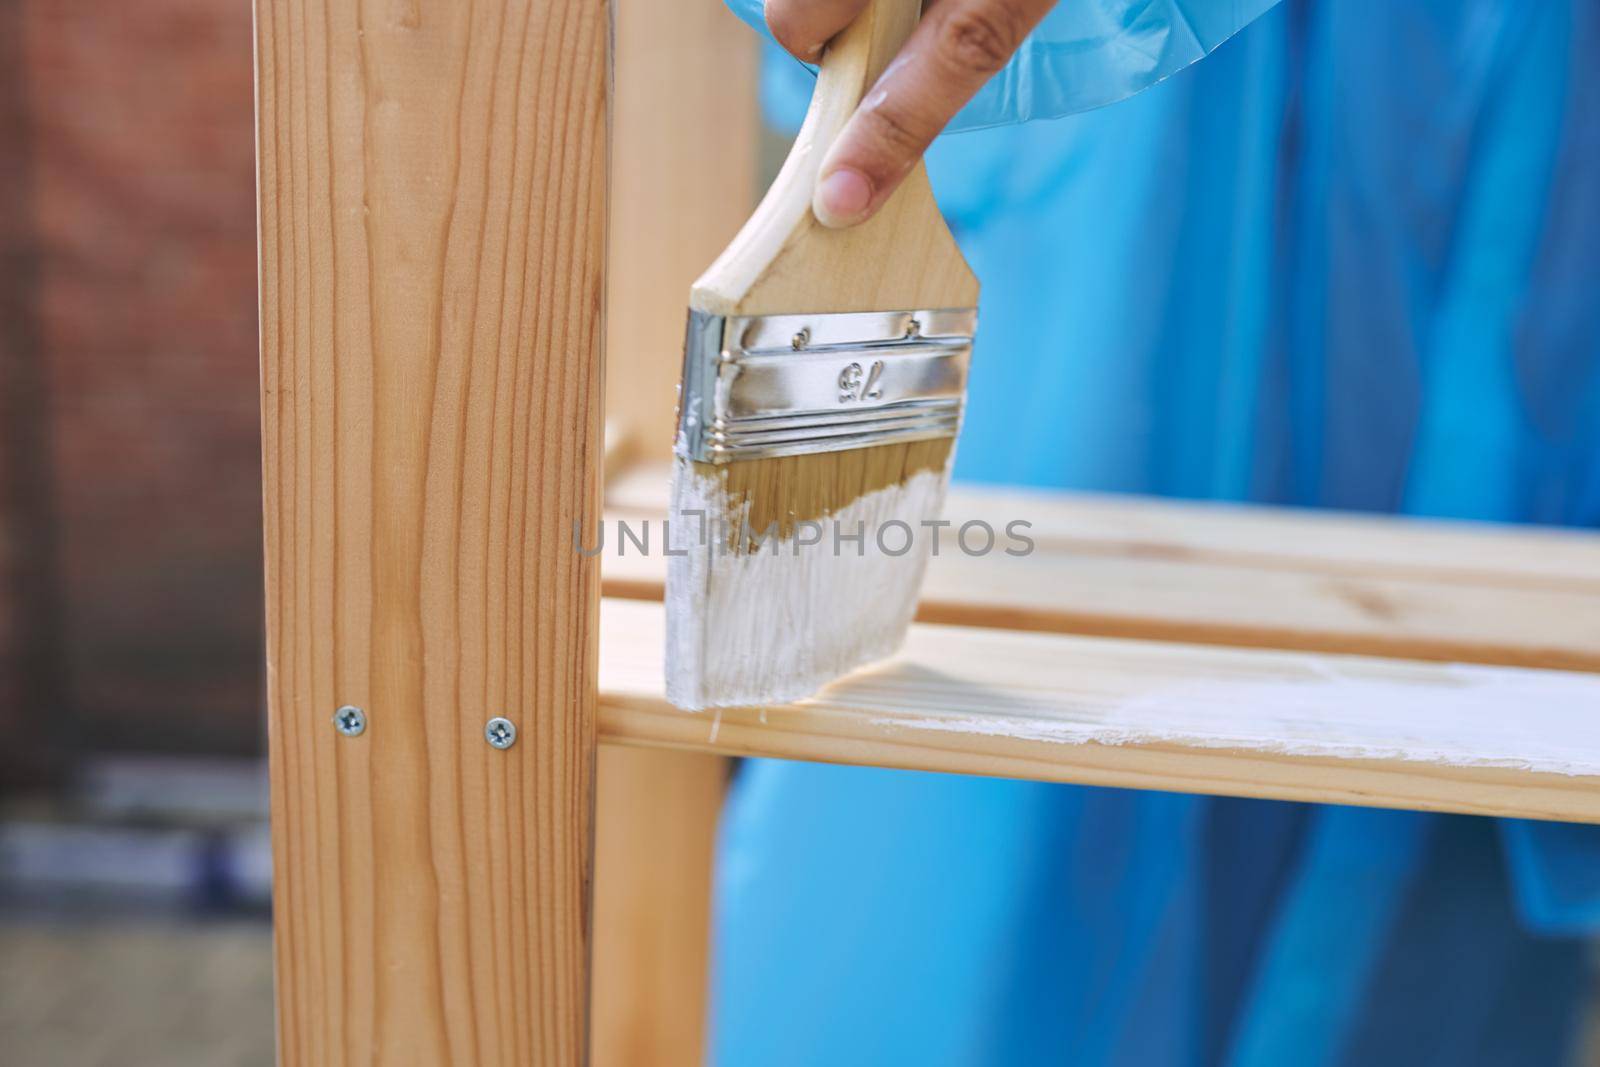 woman in protective suit painting wood renovation design. High quality photo